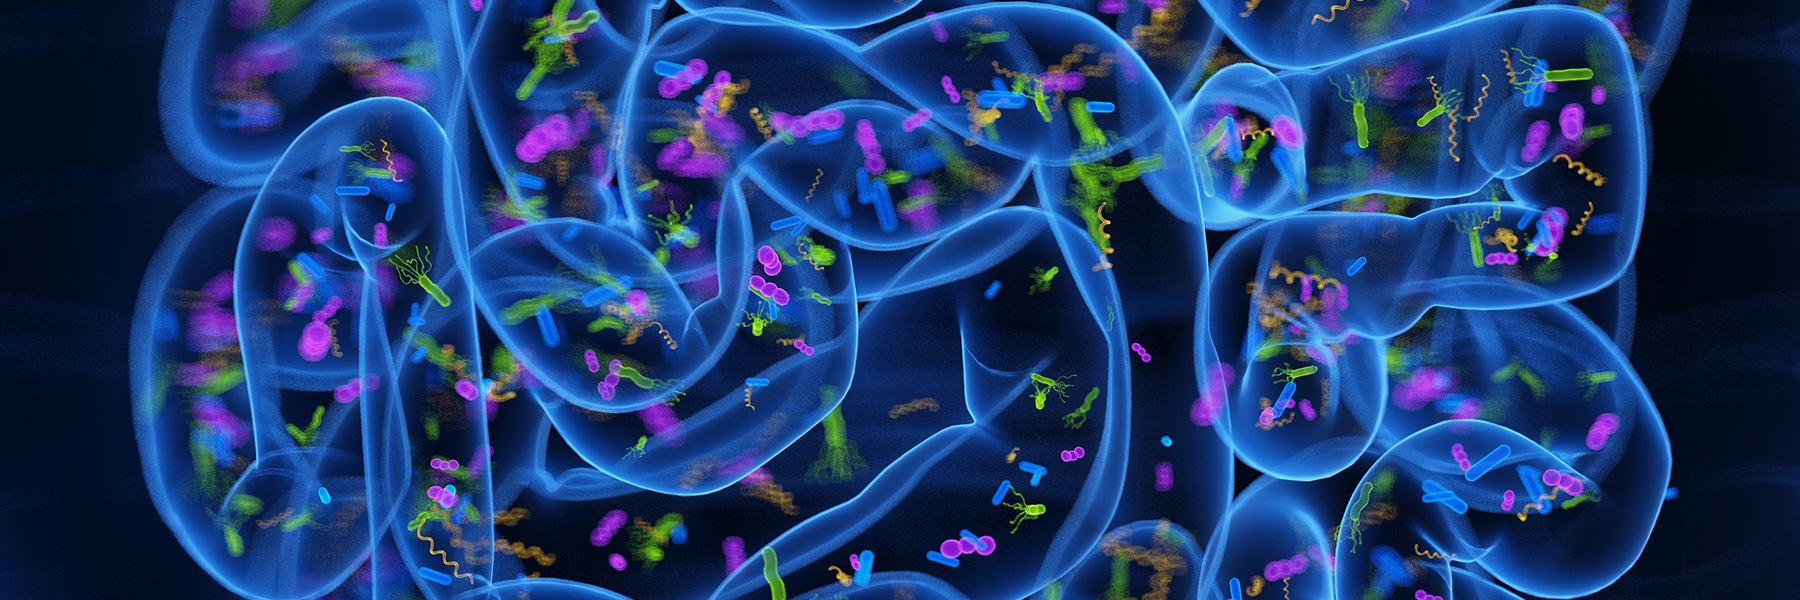 3d rendered medical illustration of the microbiome of the small intestine